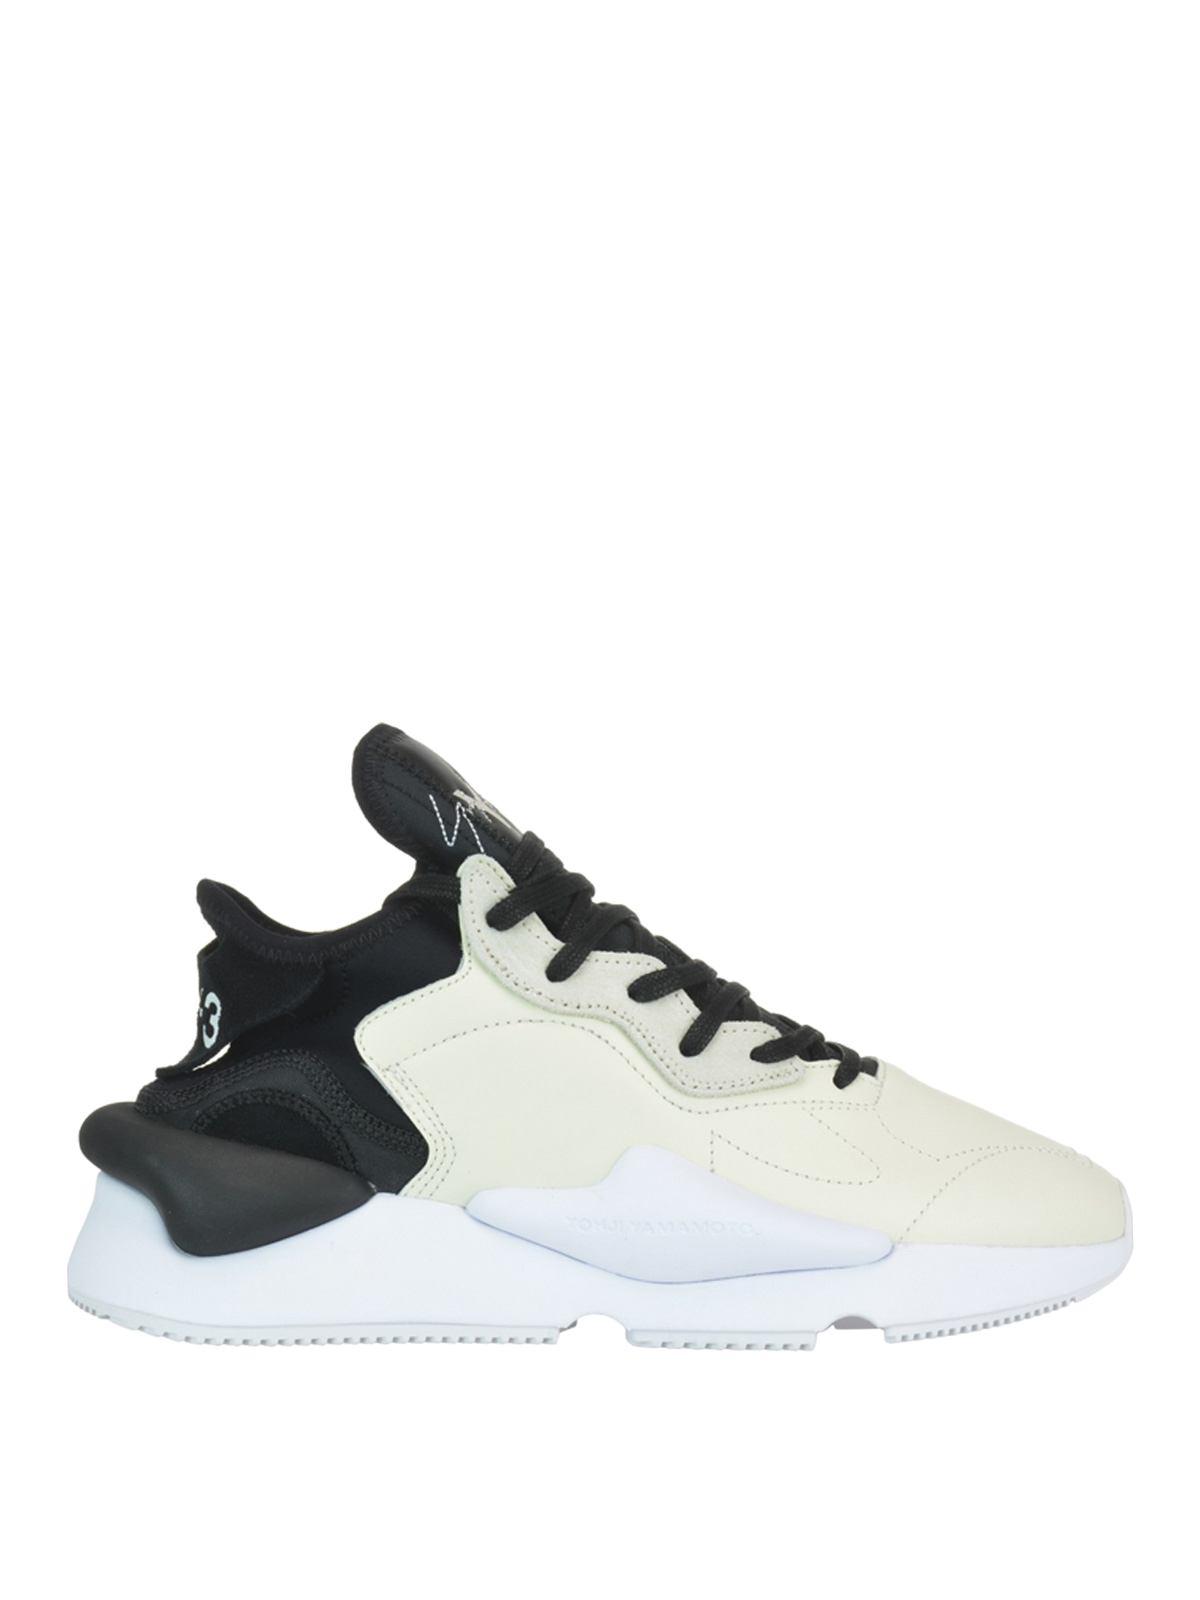 Chronisch Christchurch plotseling Trainers Adidas Y-3 - Y-3 Kaiwa leather and fabric sneakers - EF2546